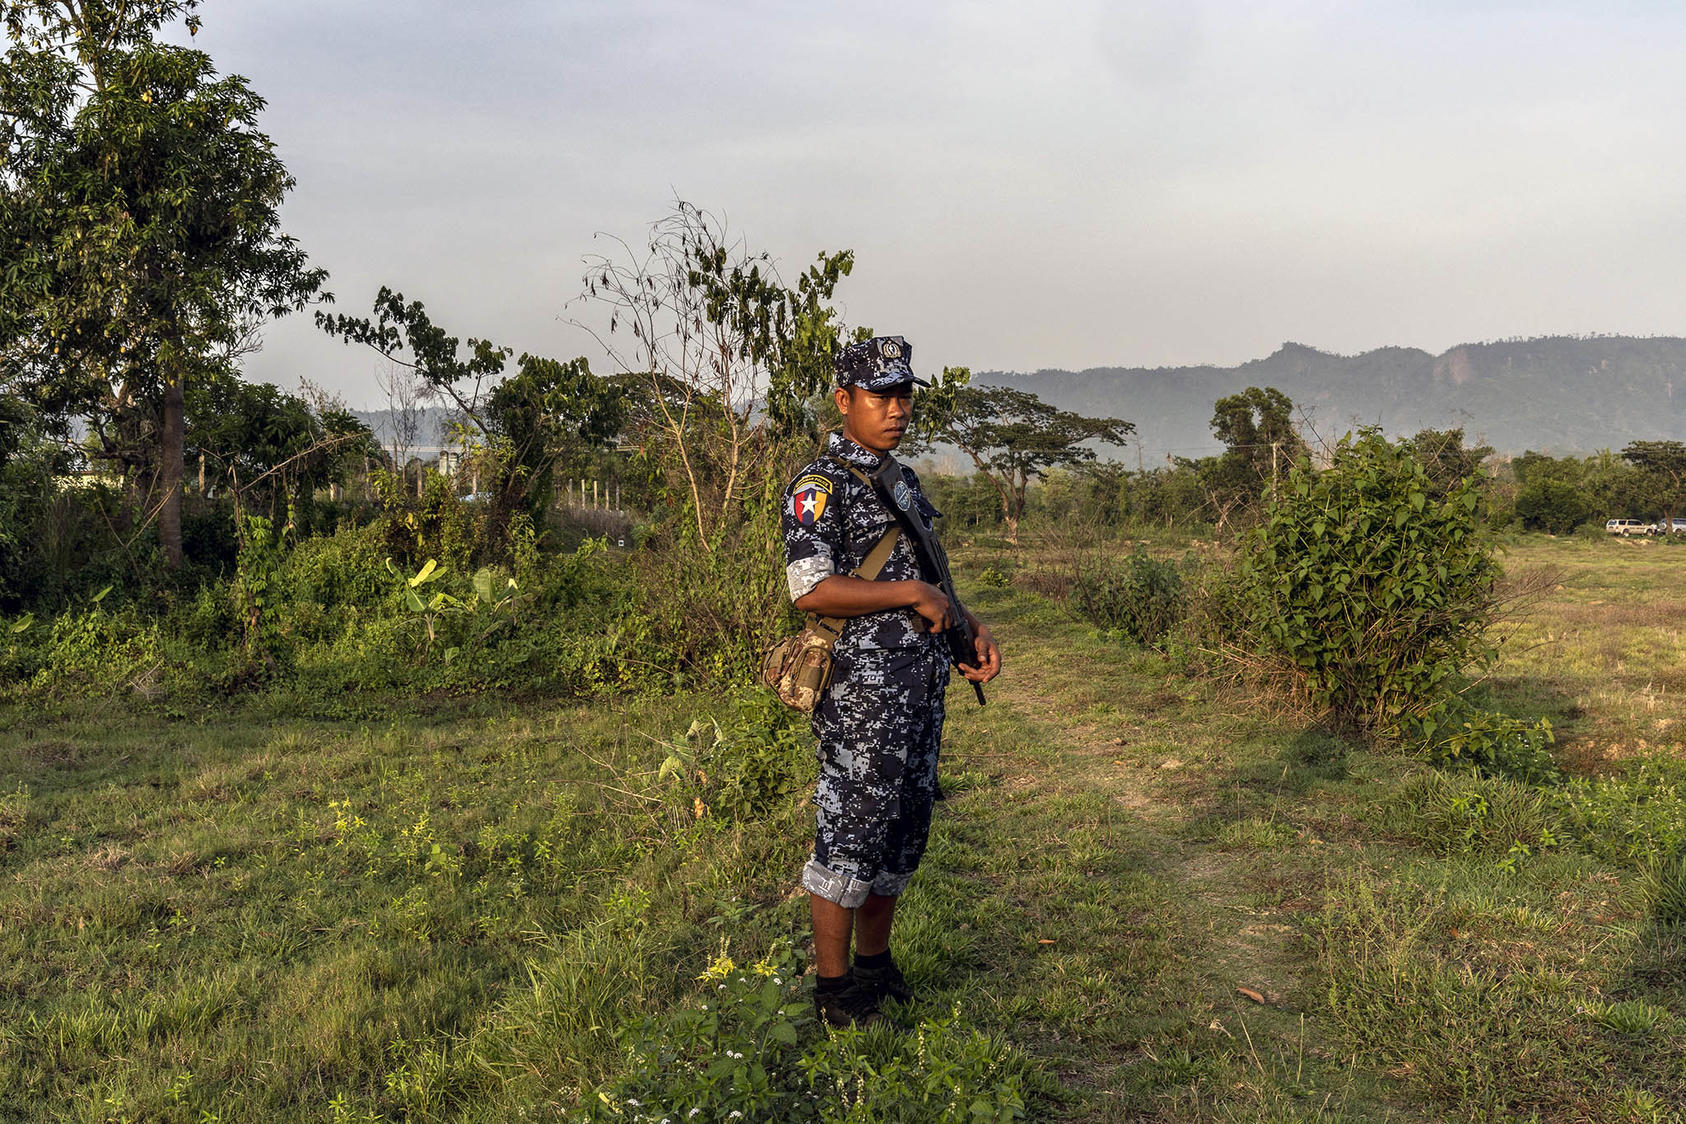 A border guard blocks near Muangdaw, Myanmar, during a government-led tour of Rakhine State on May 29, 2019. (Adam Dean/The New York Times)